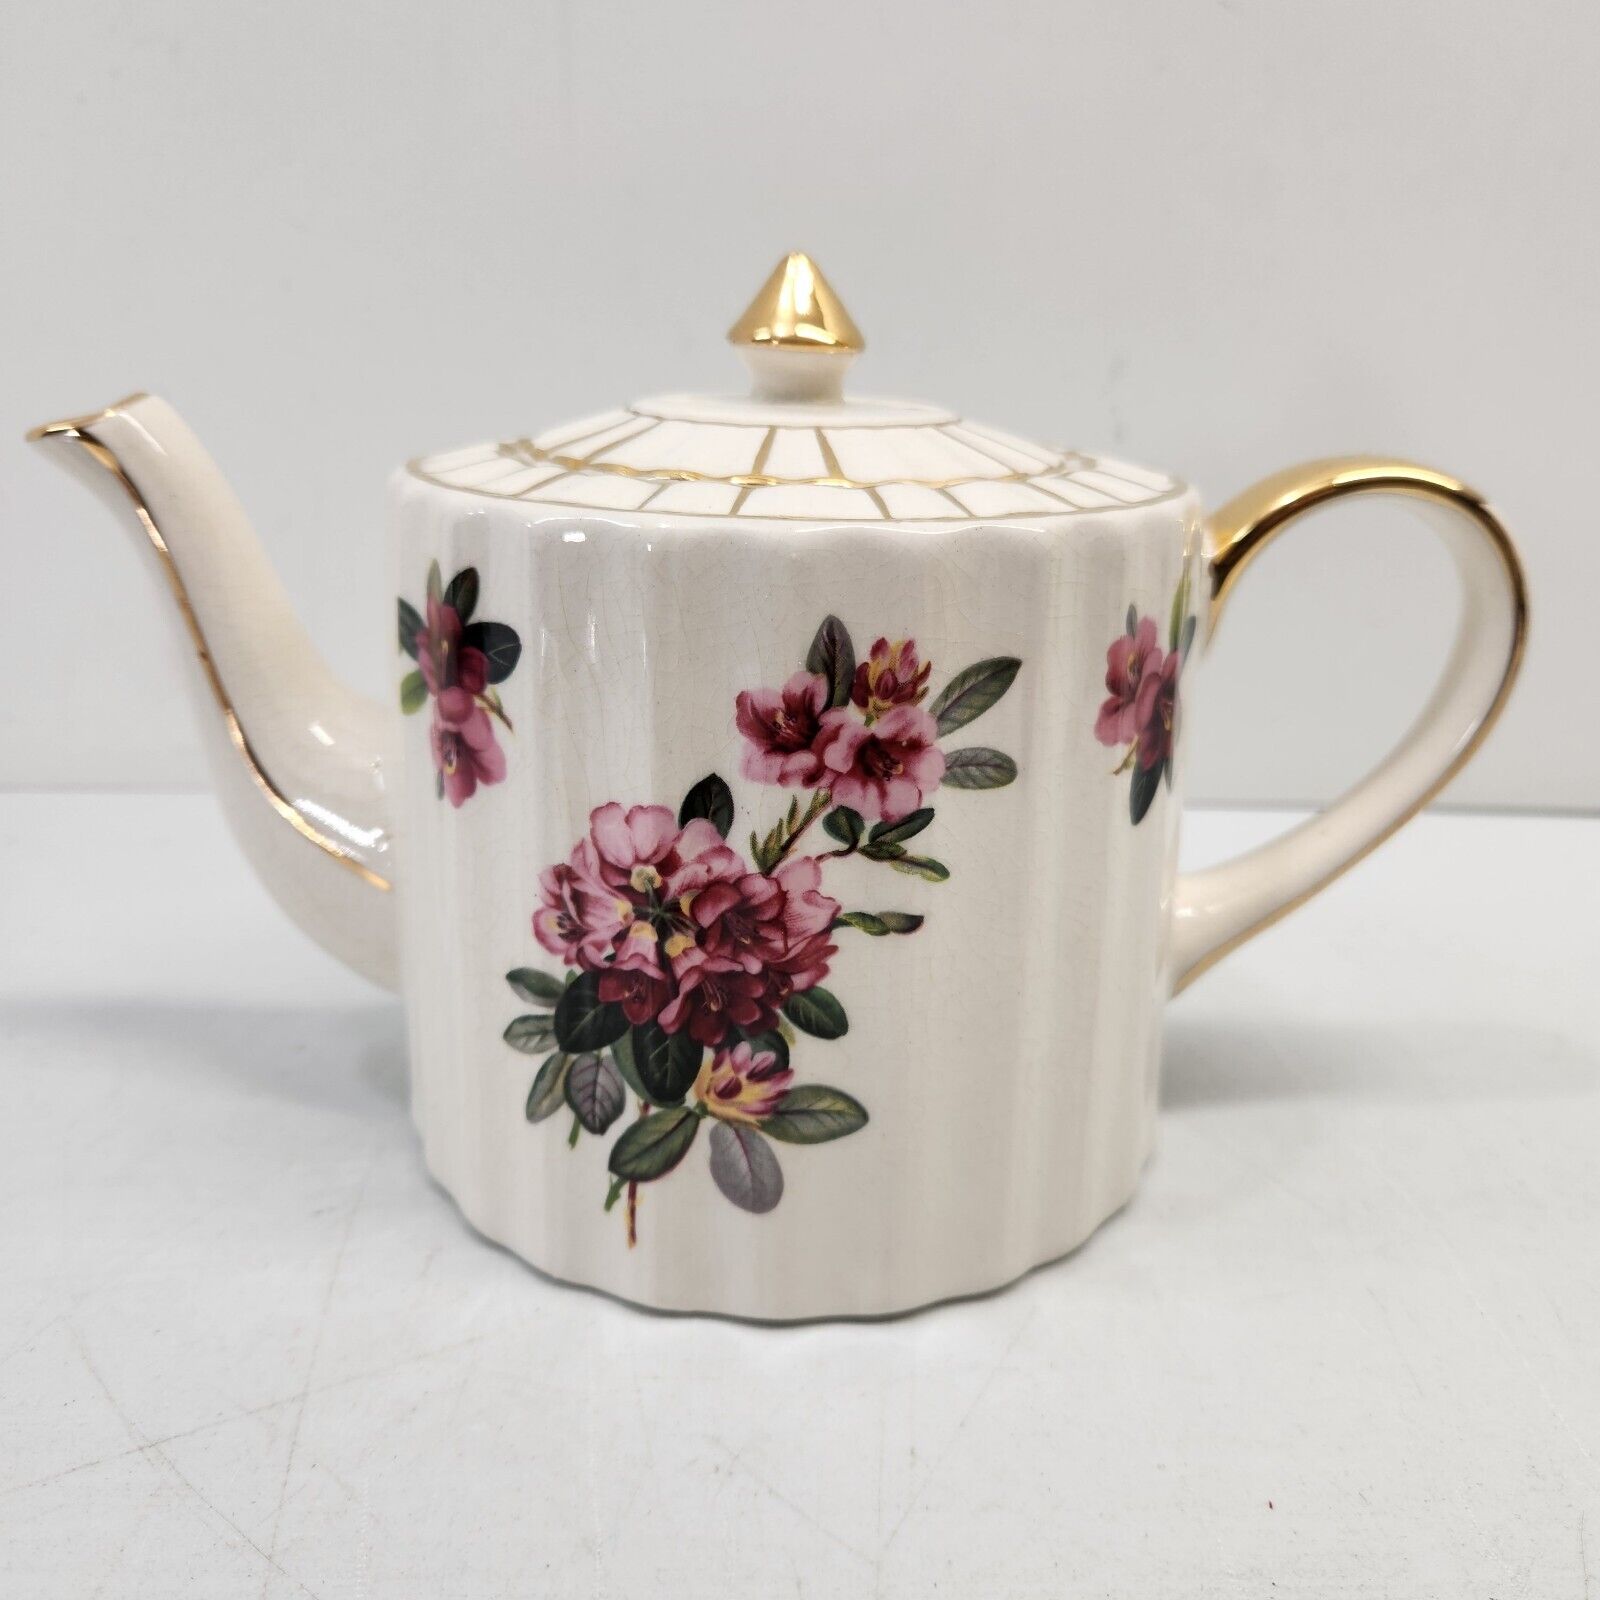 Vtg PRICE BROS Made In England Floral  Ceramic Teapot Gold Trim and Accents 2676